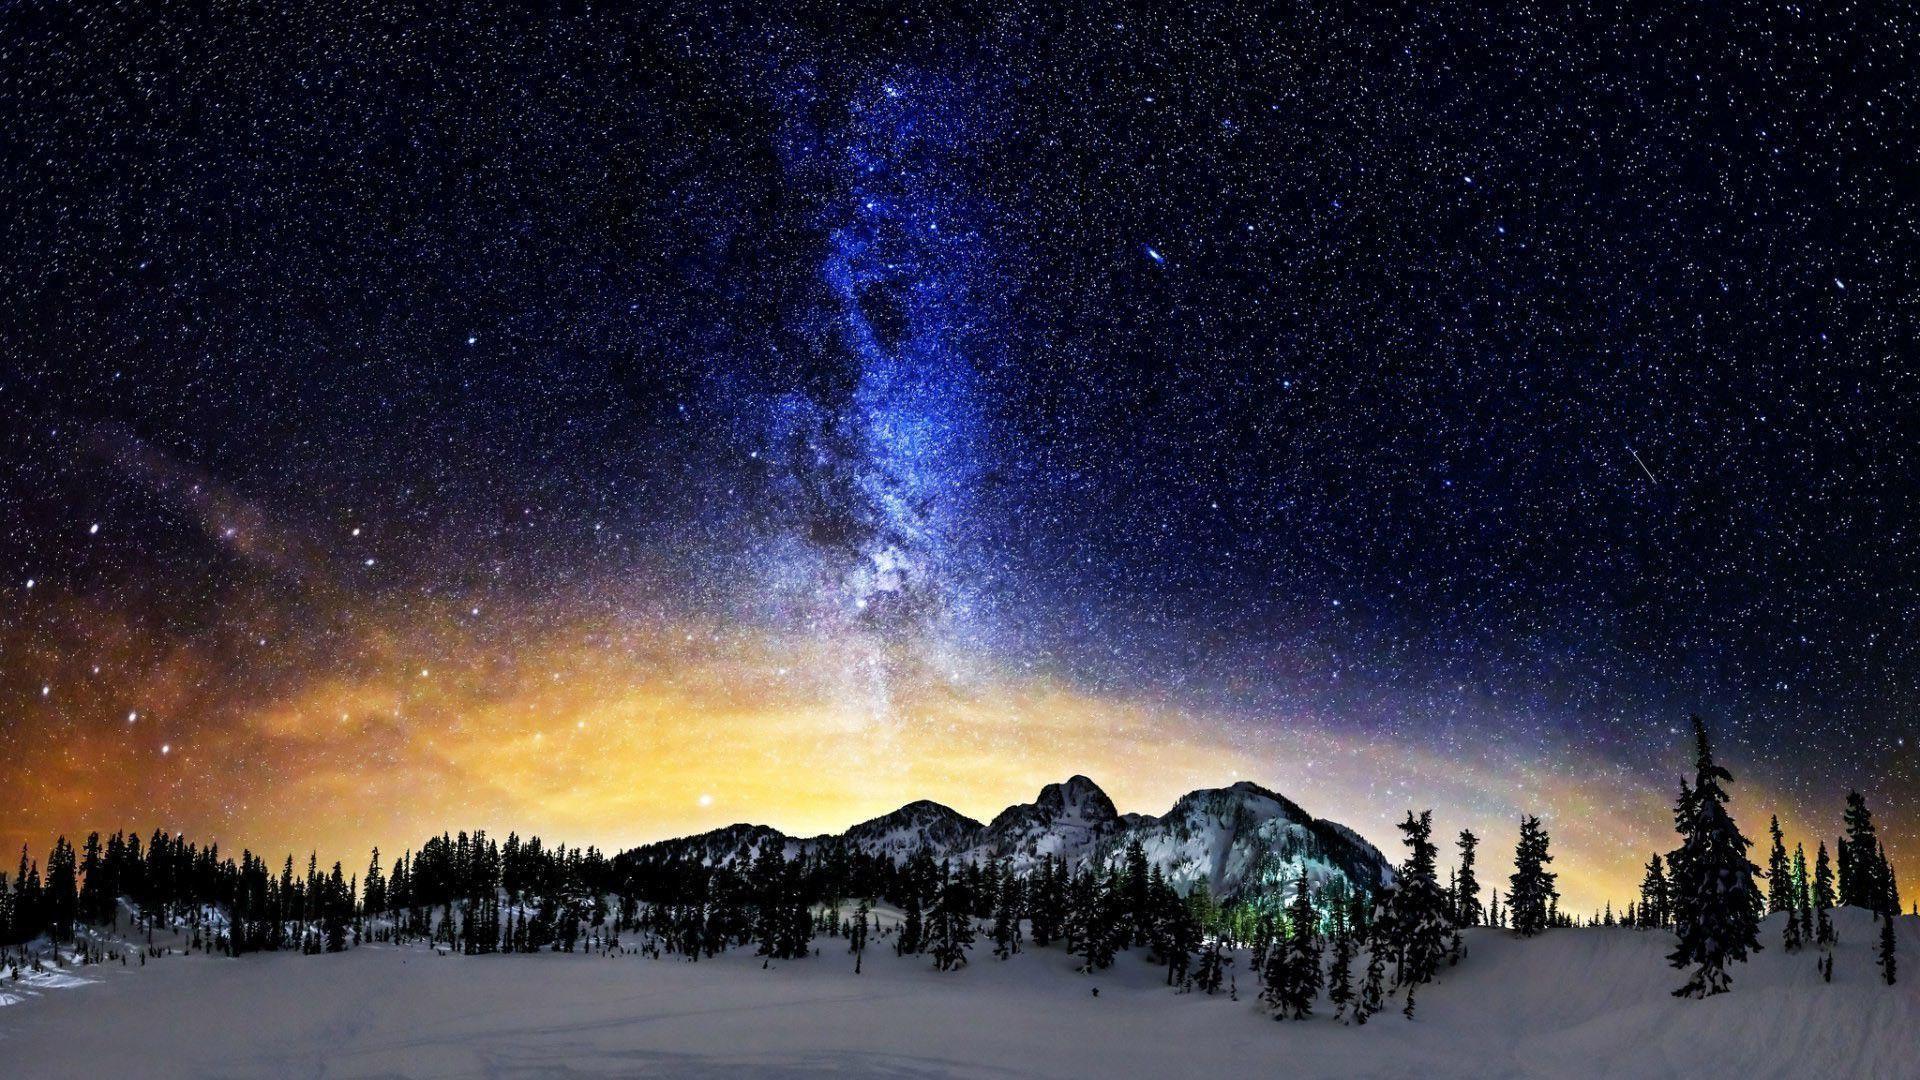 Milky Way above the snowy mountains wallpaper #